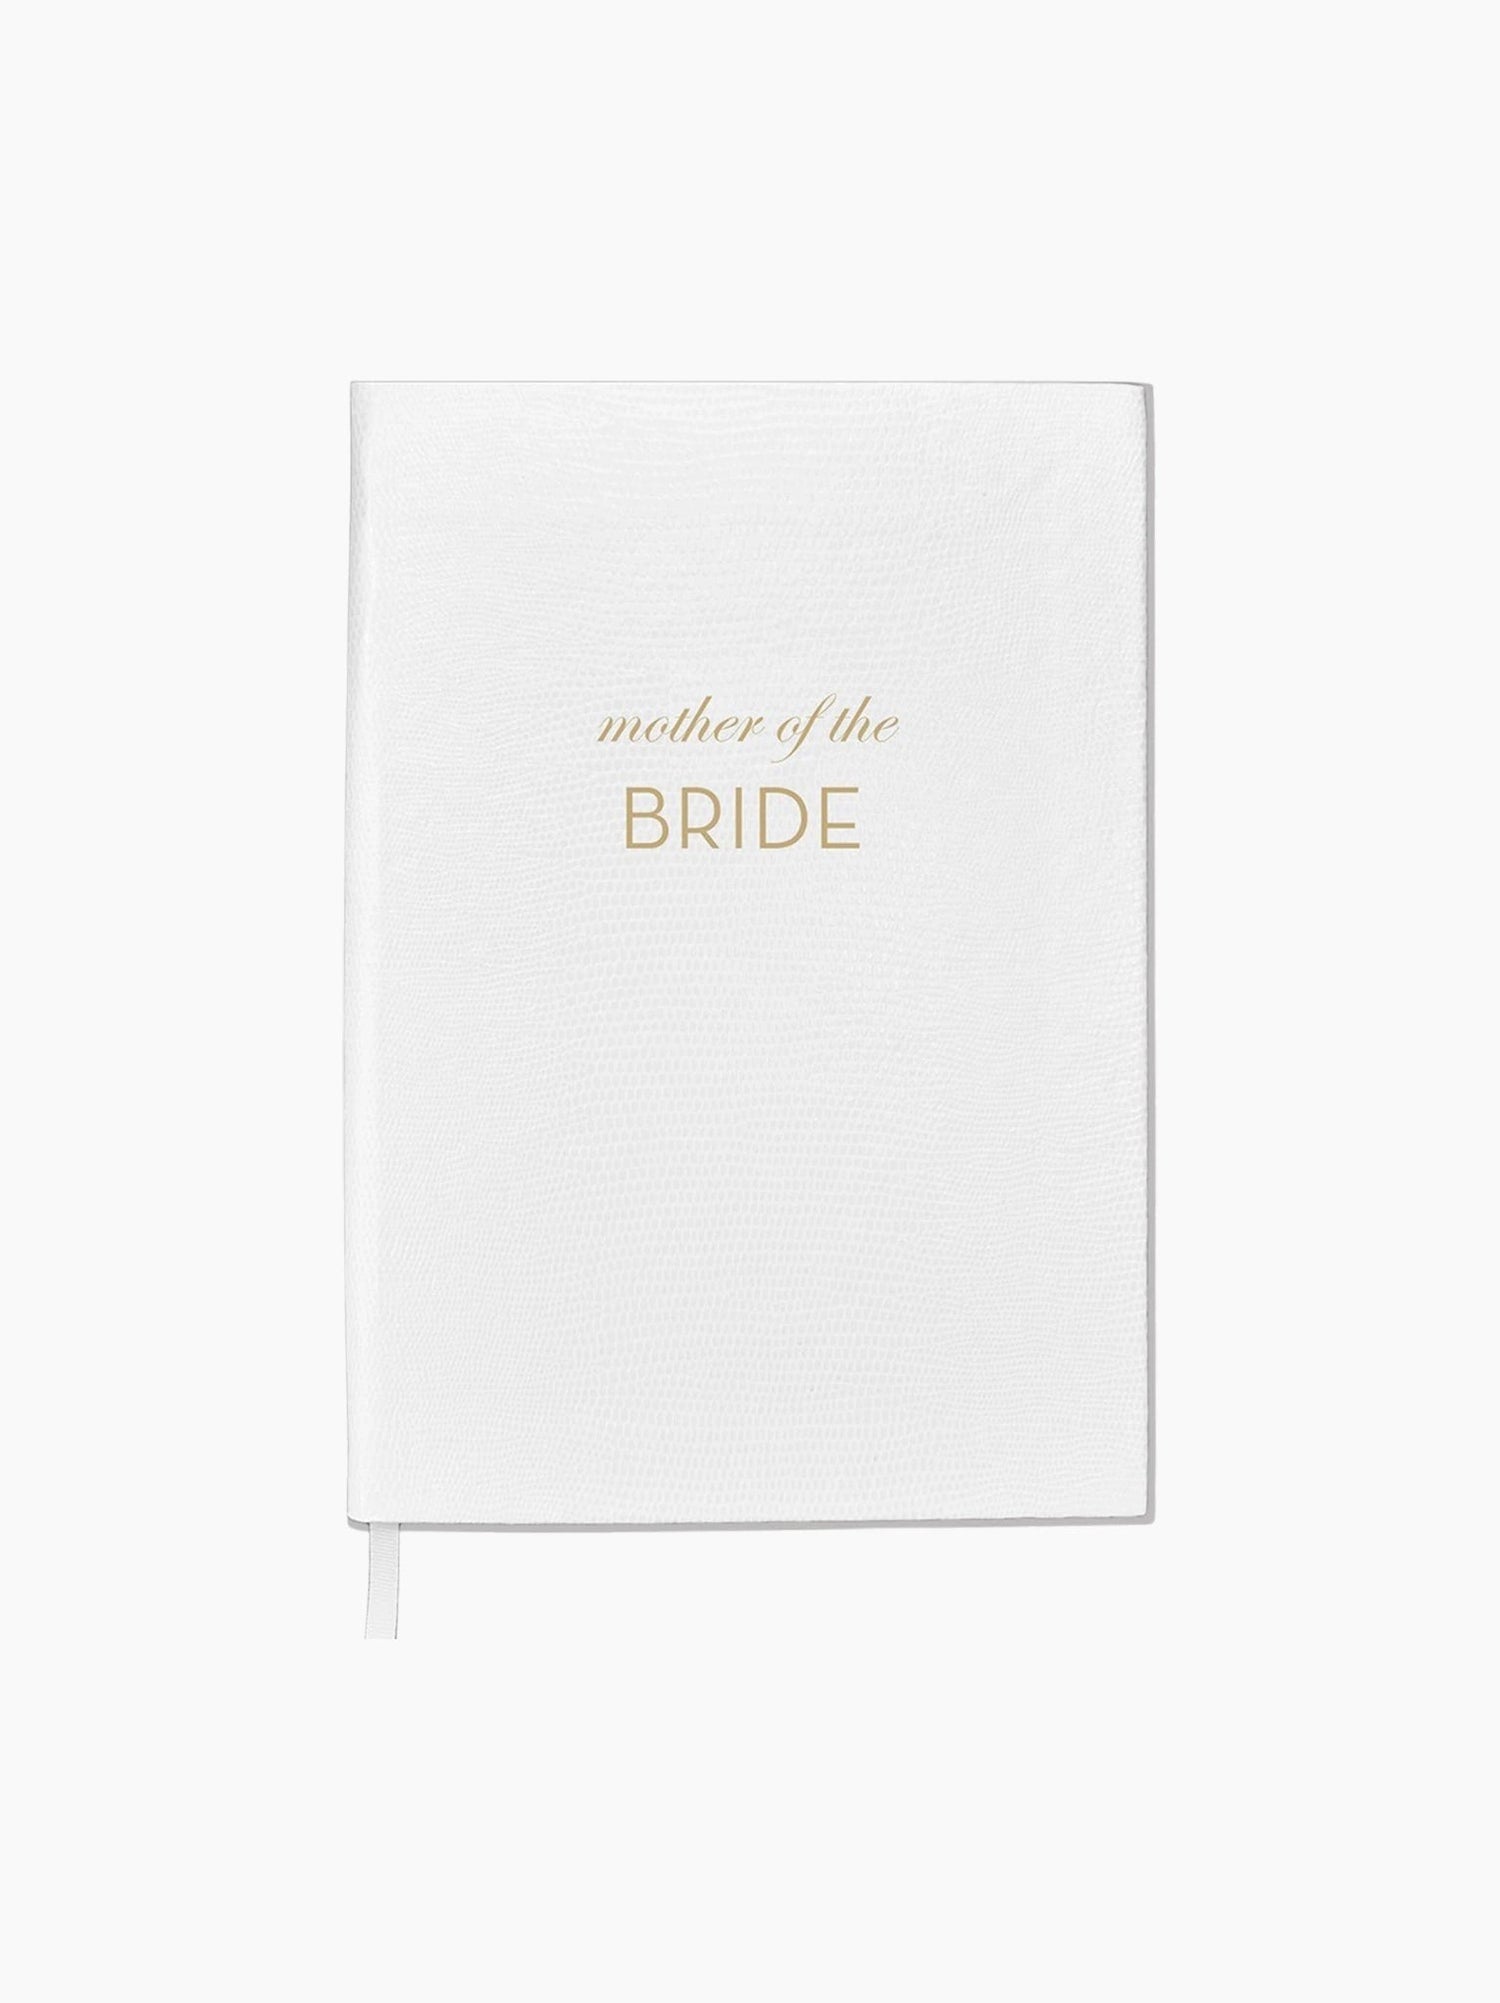 Wedding Gift Guide - Bridal Party